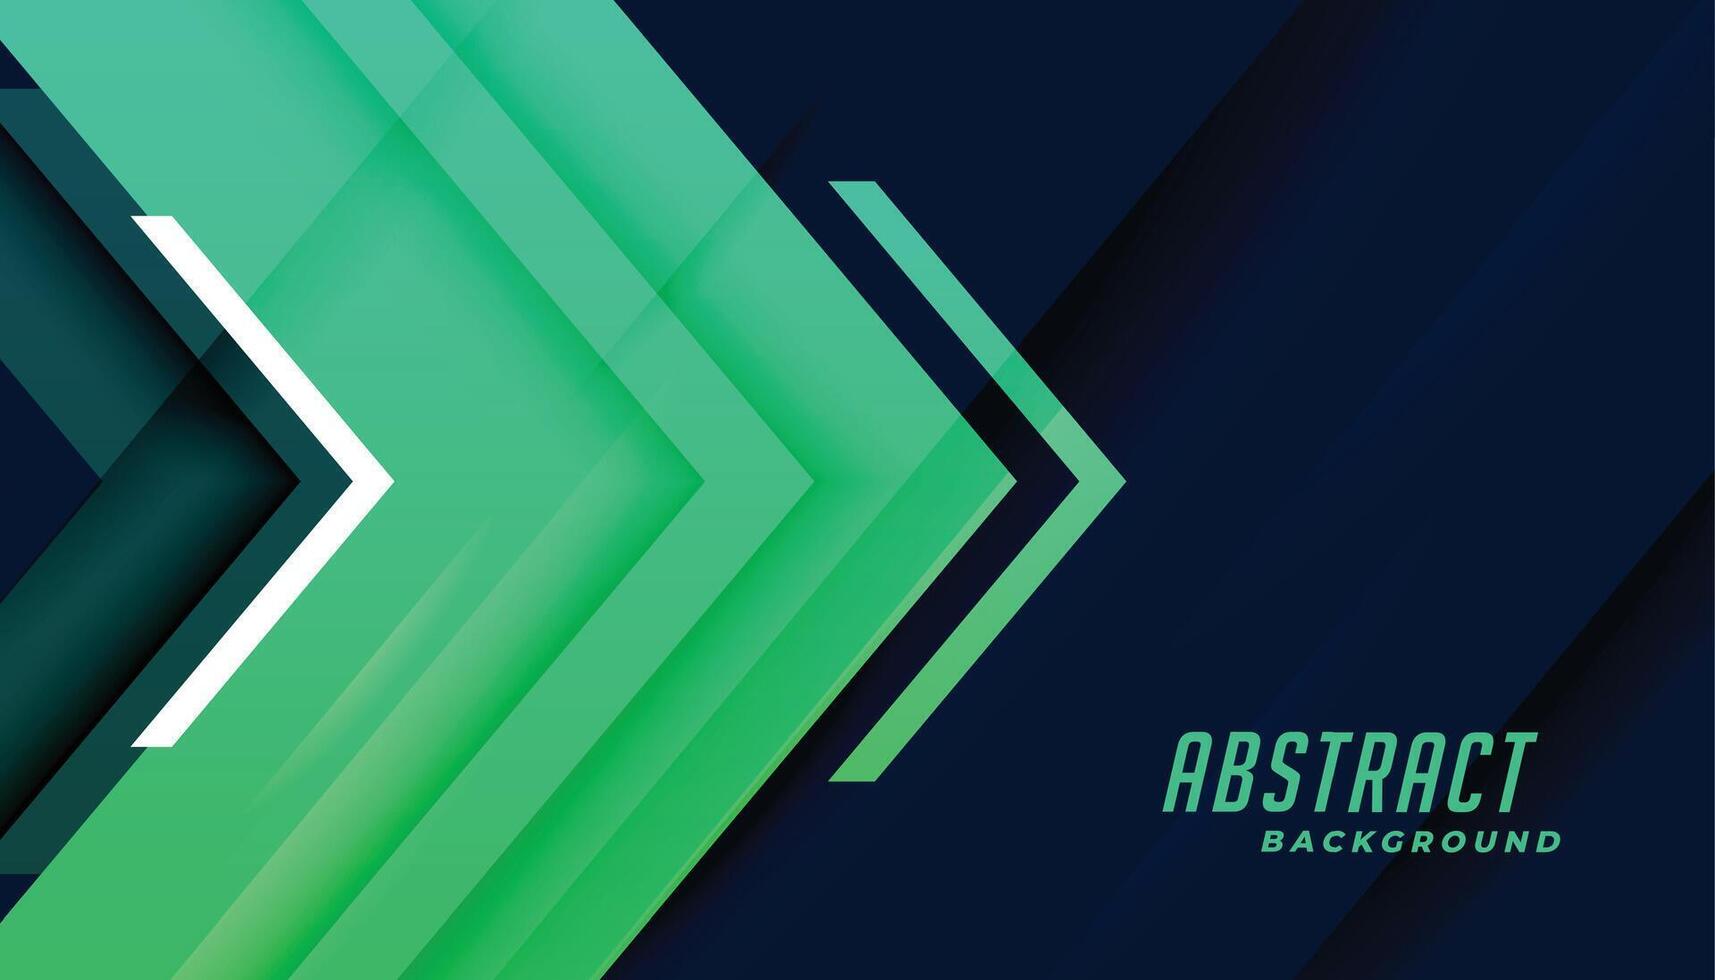 abstract background in green geometric arrow style vector